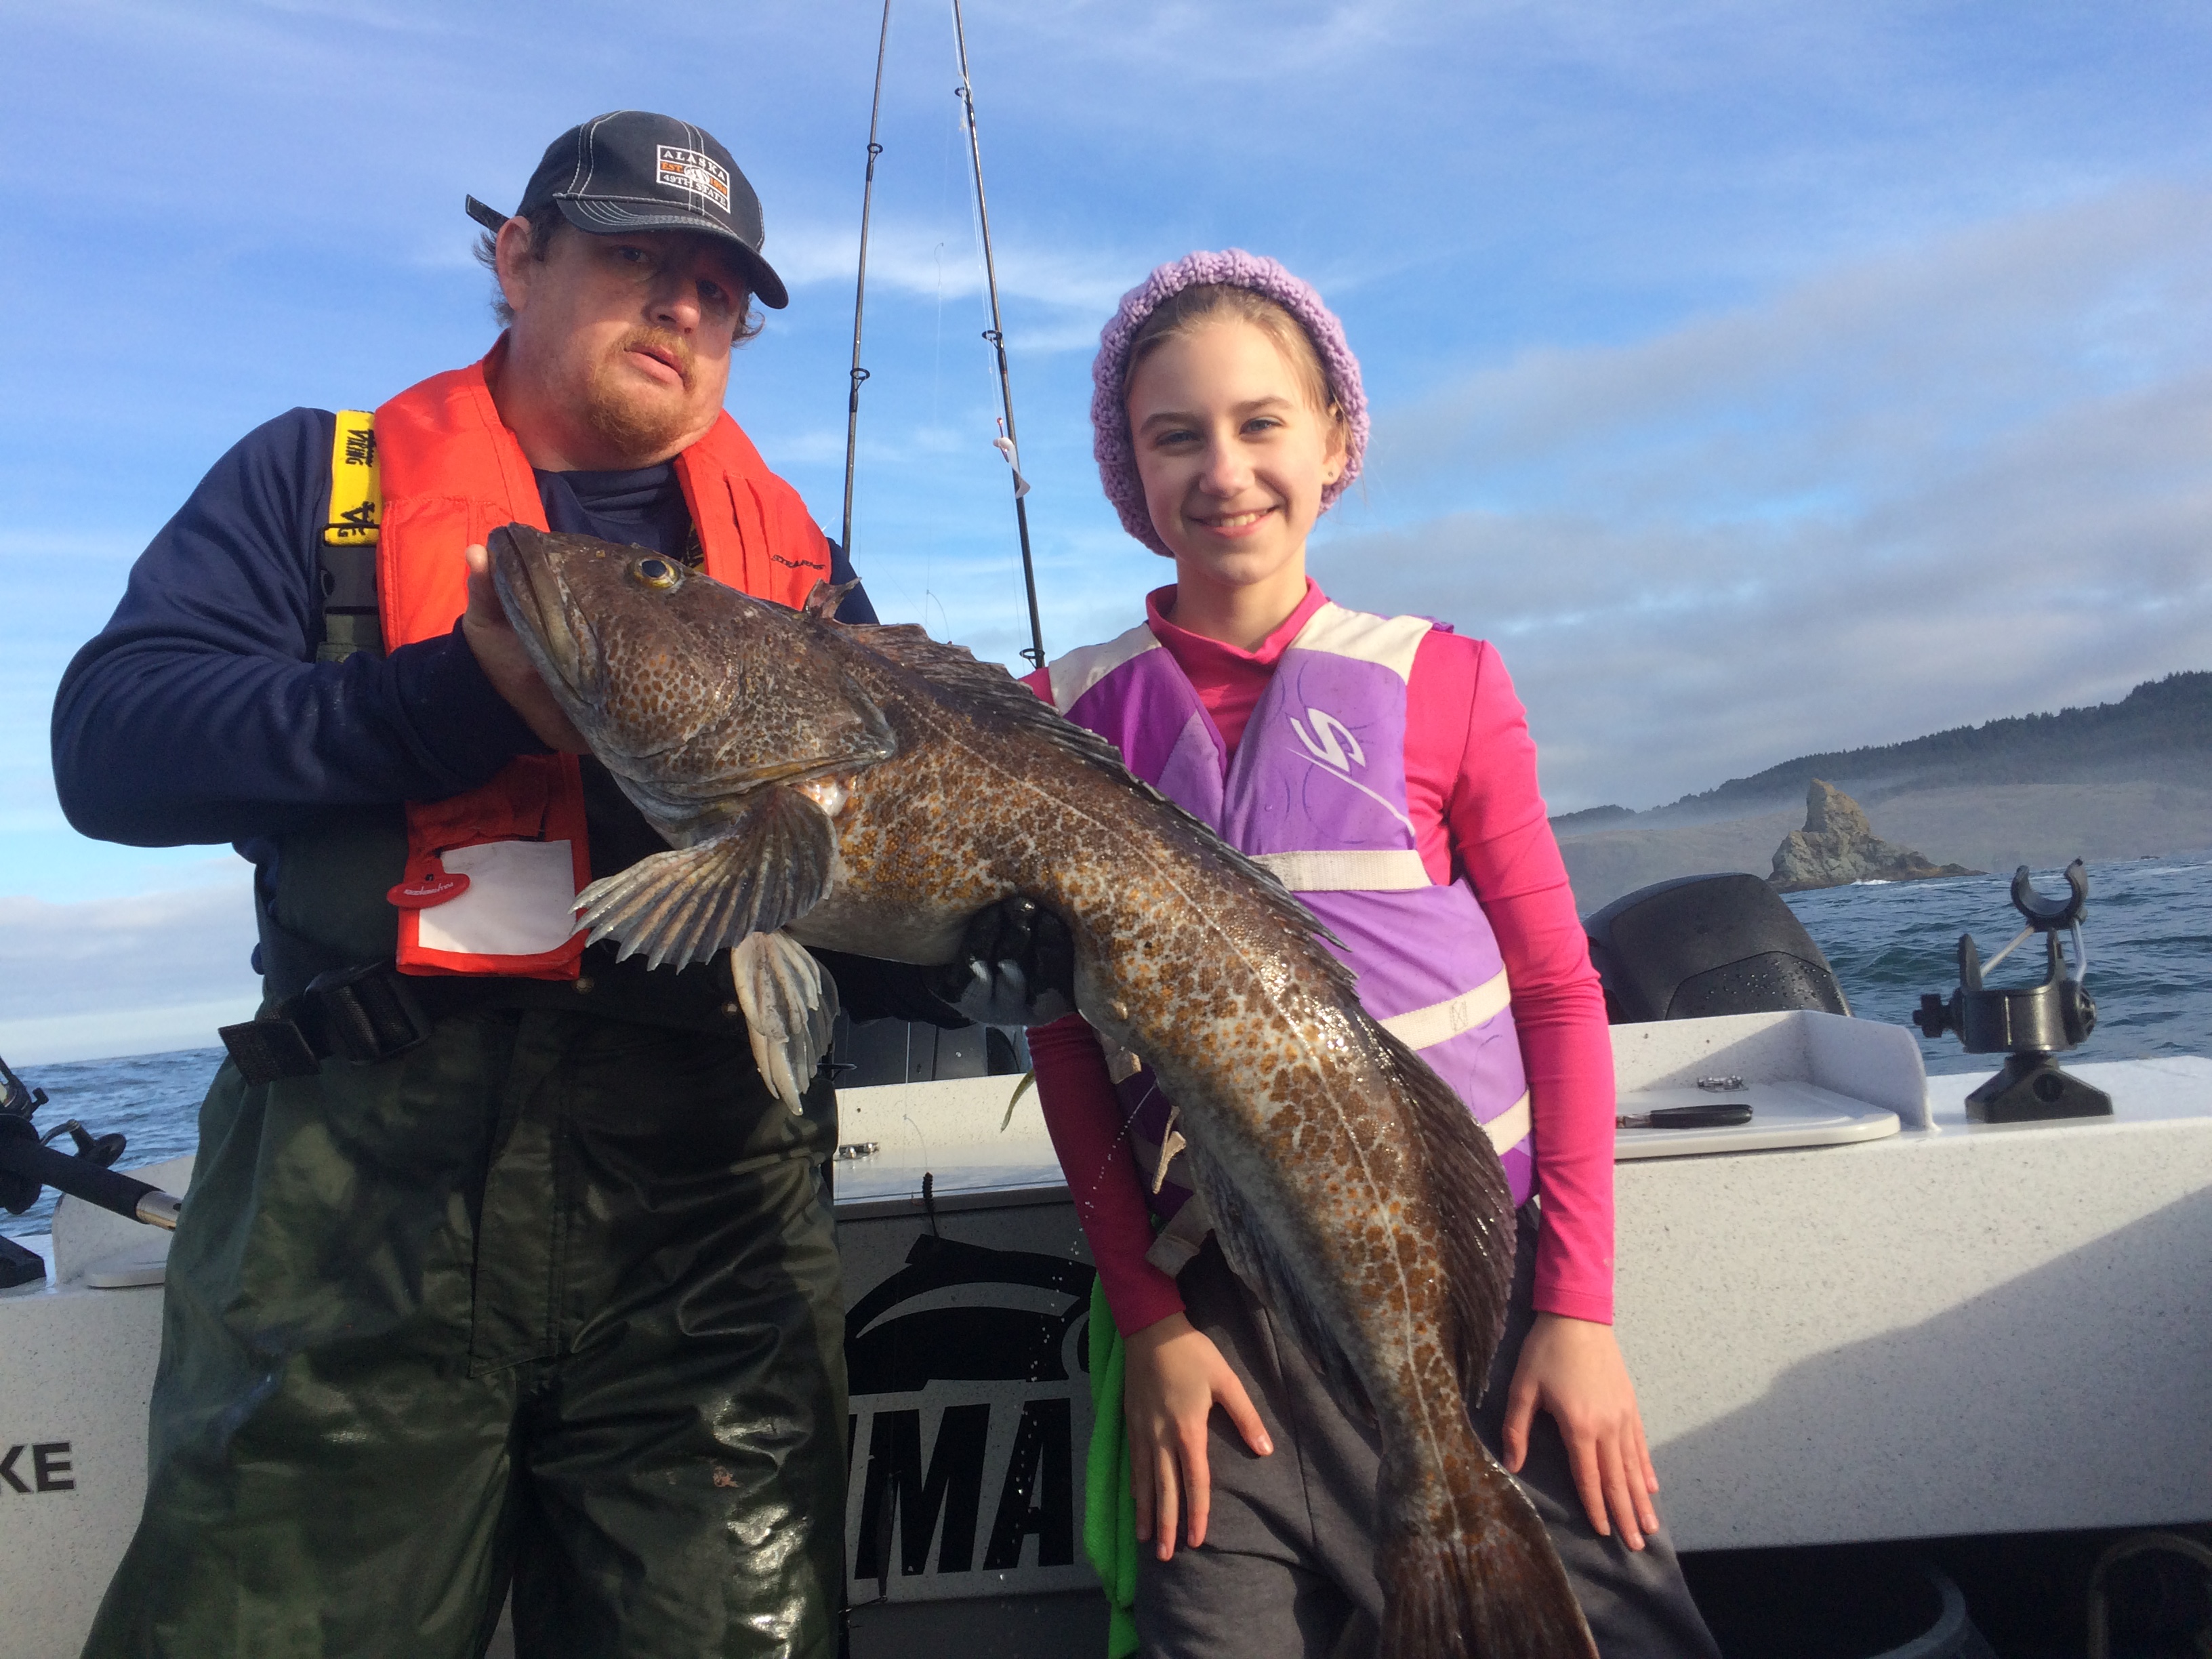 First lingcod caught by young angler